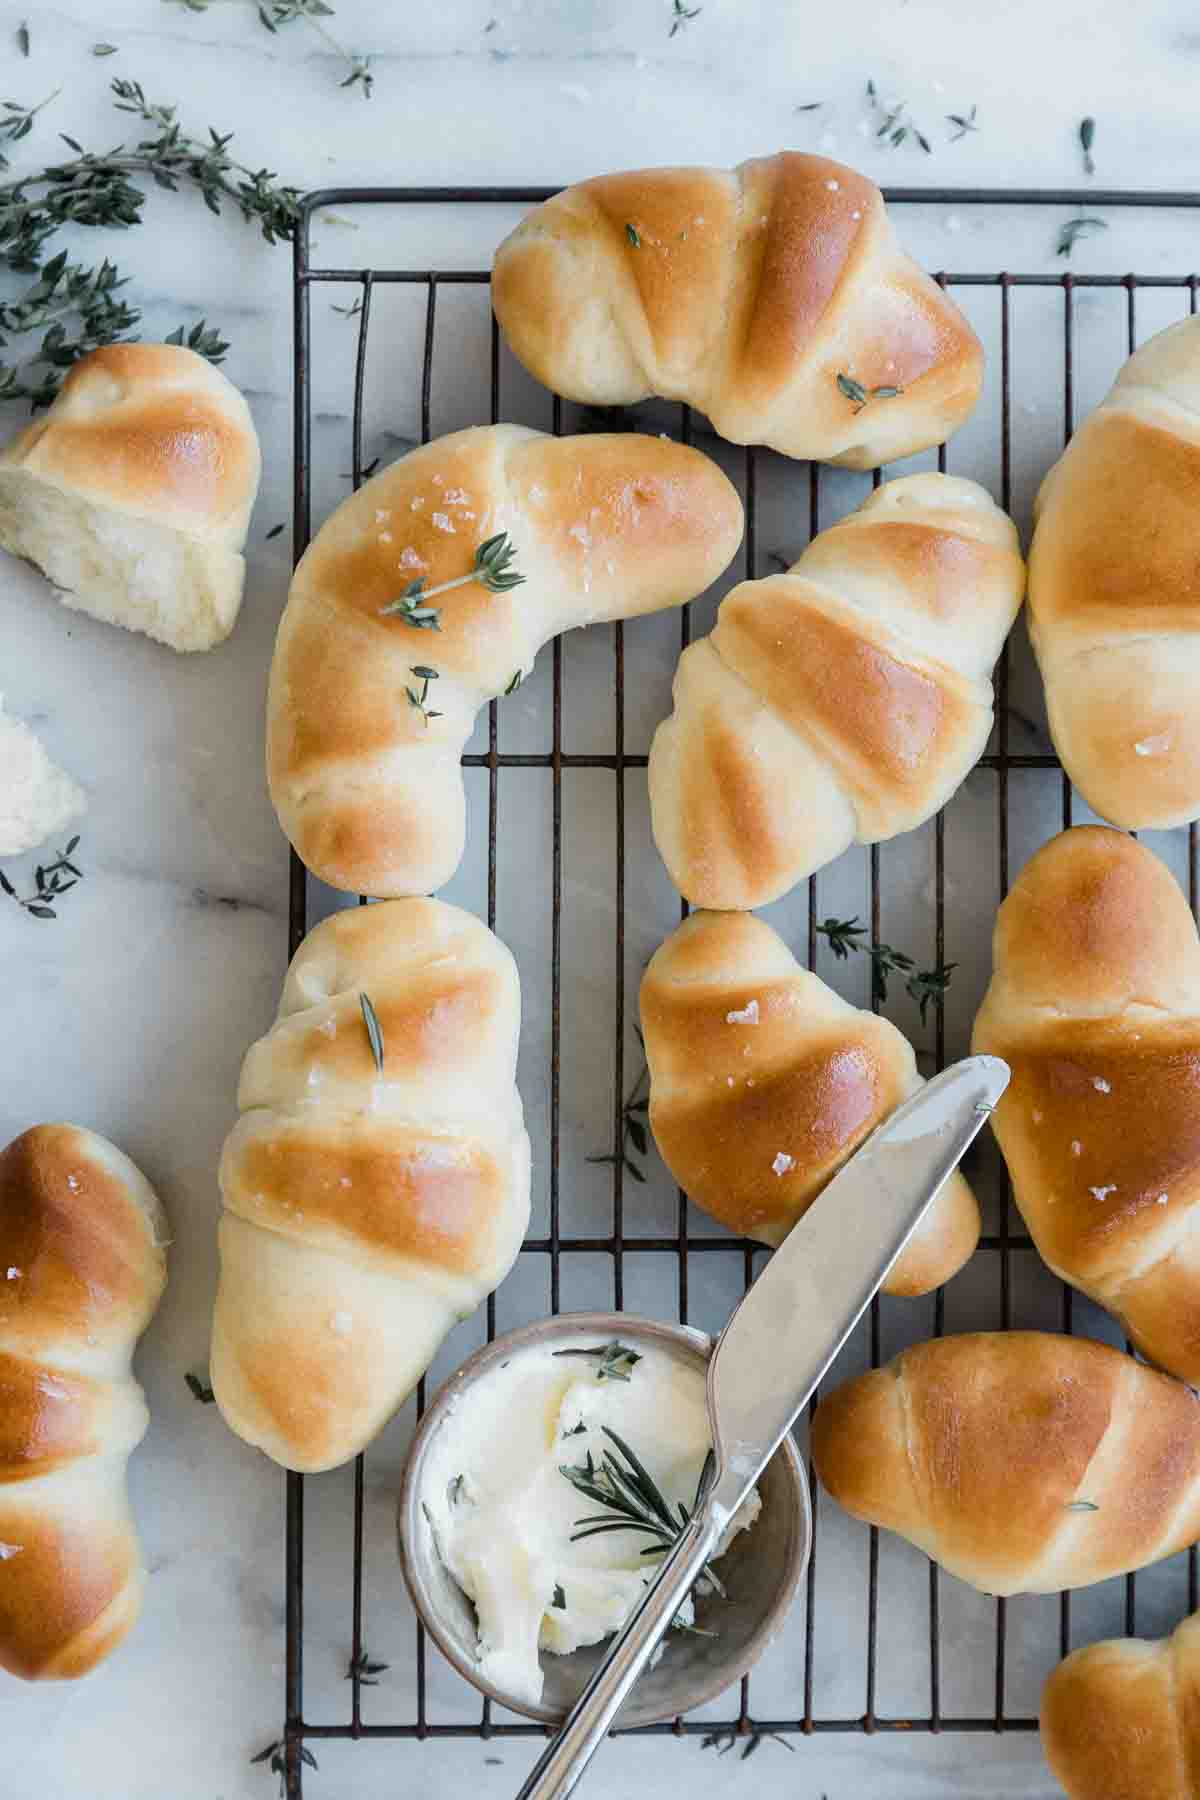 Crescent roll recipe rolls on a cooling rack. There is a small bowl of butter to the side.